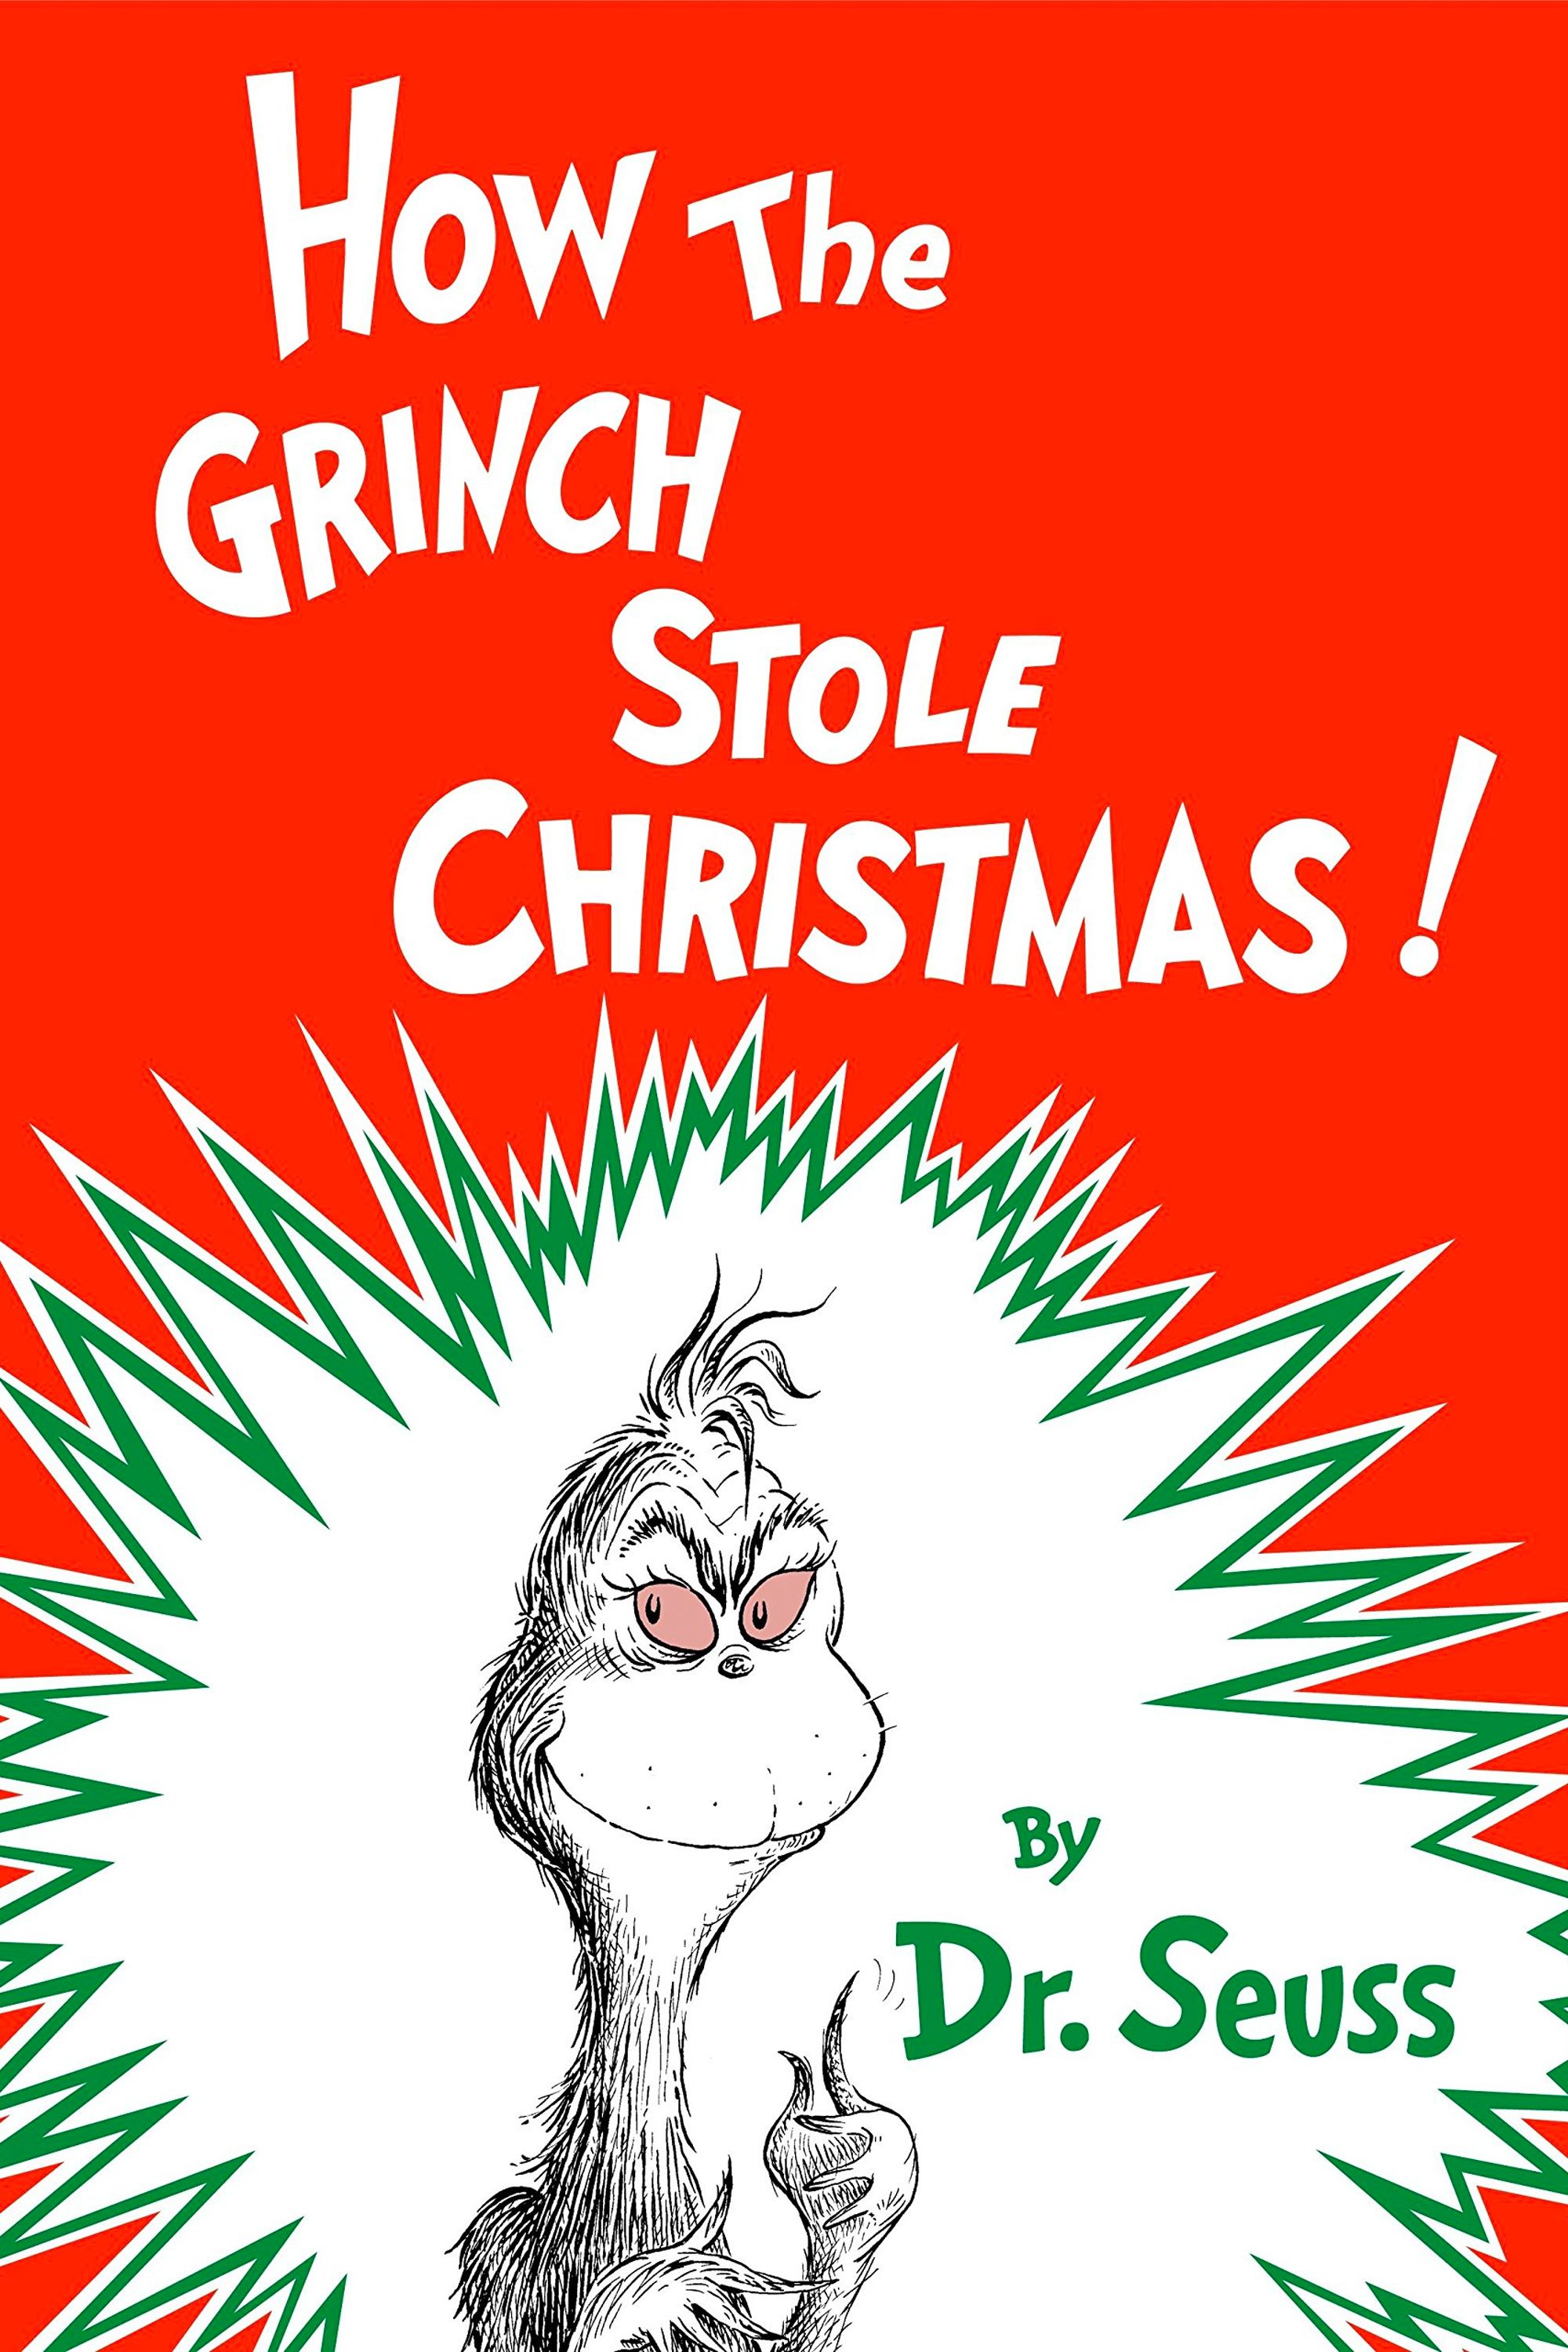 The 10 Best Quotes From How The Grinch Stole Christmas (1966)